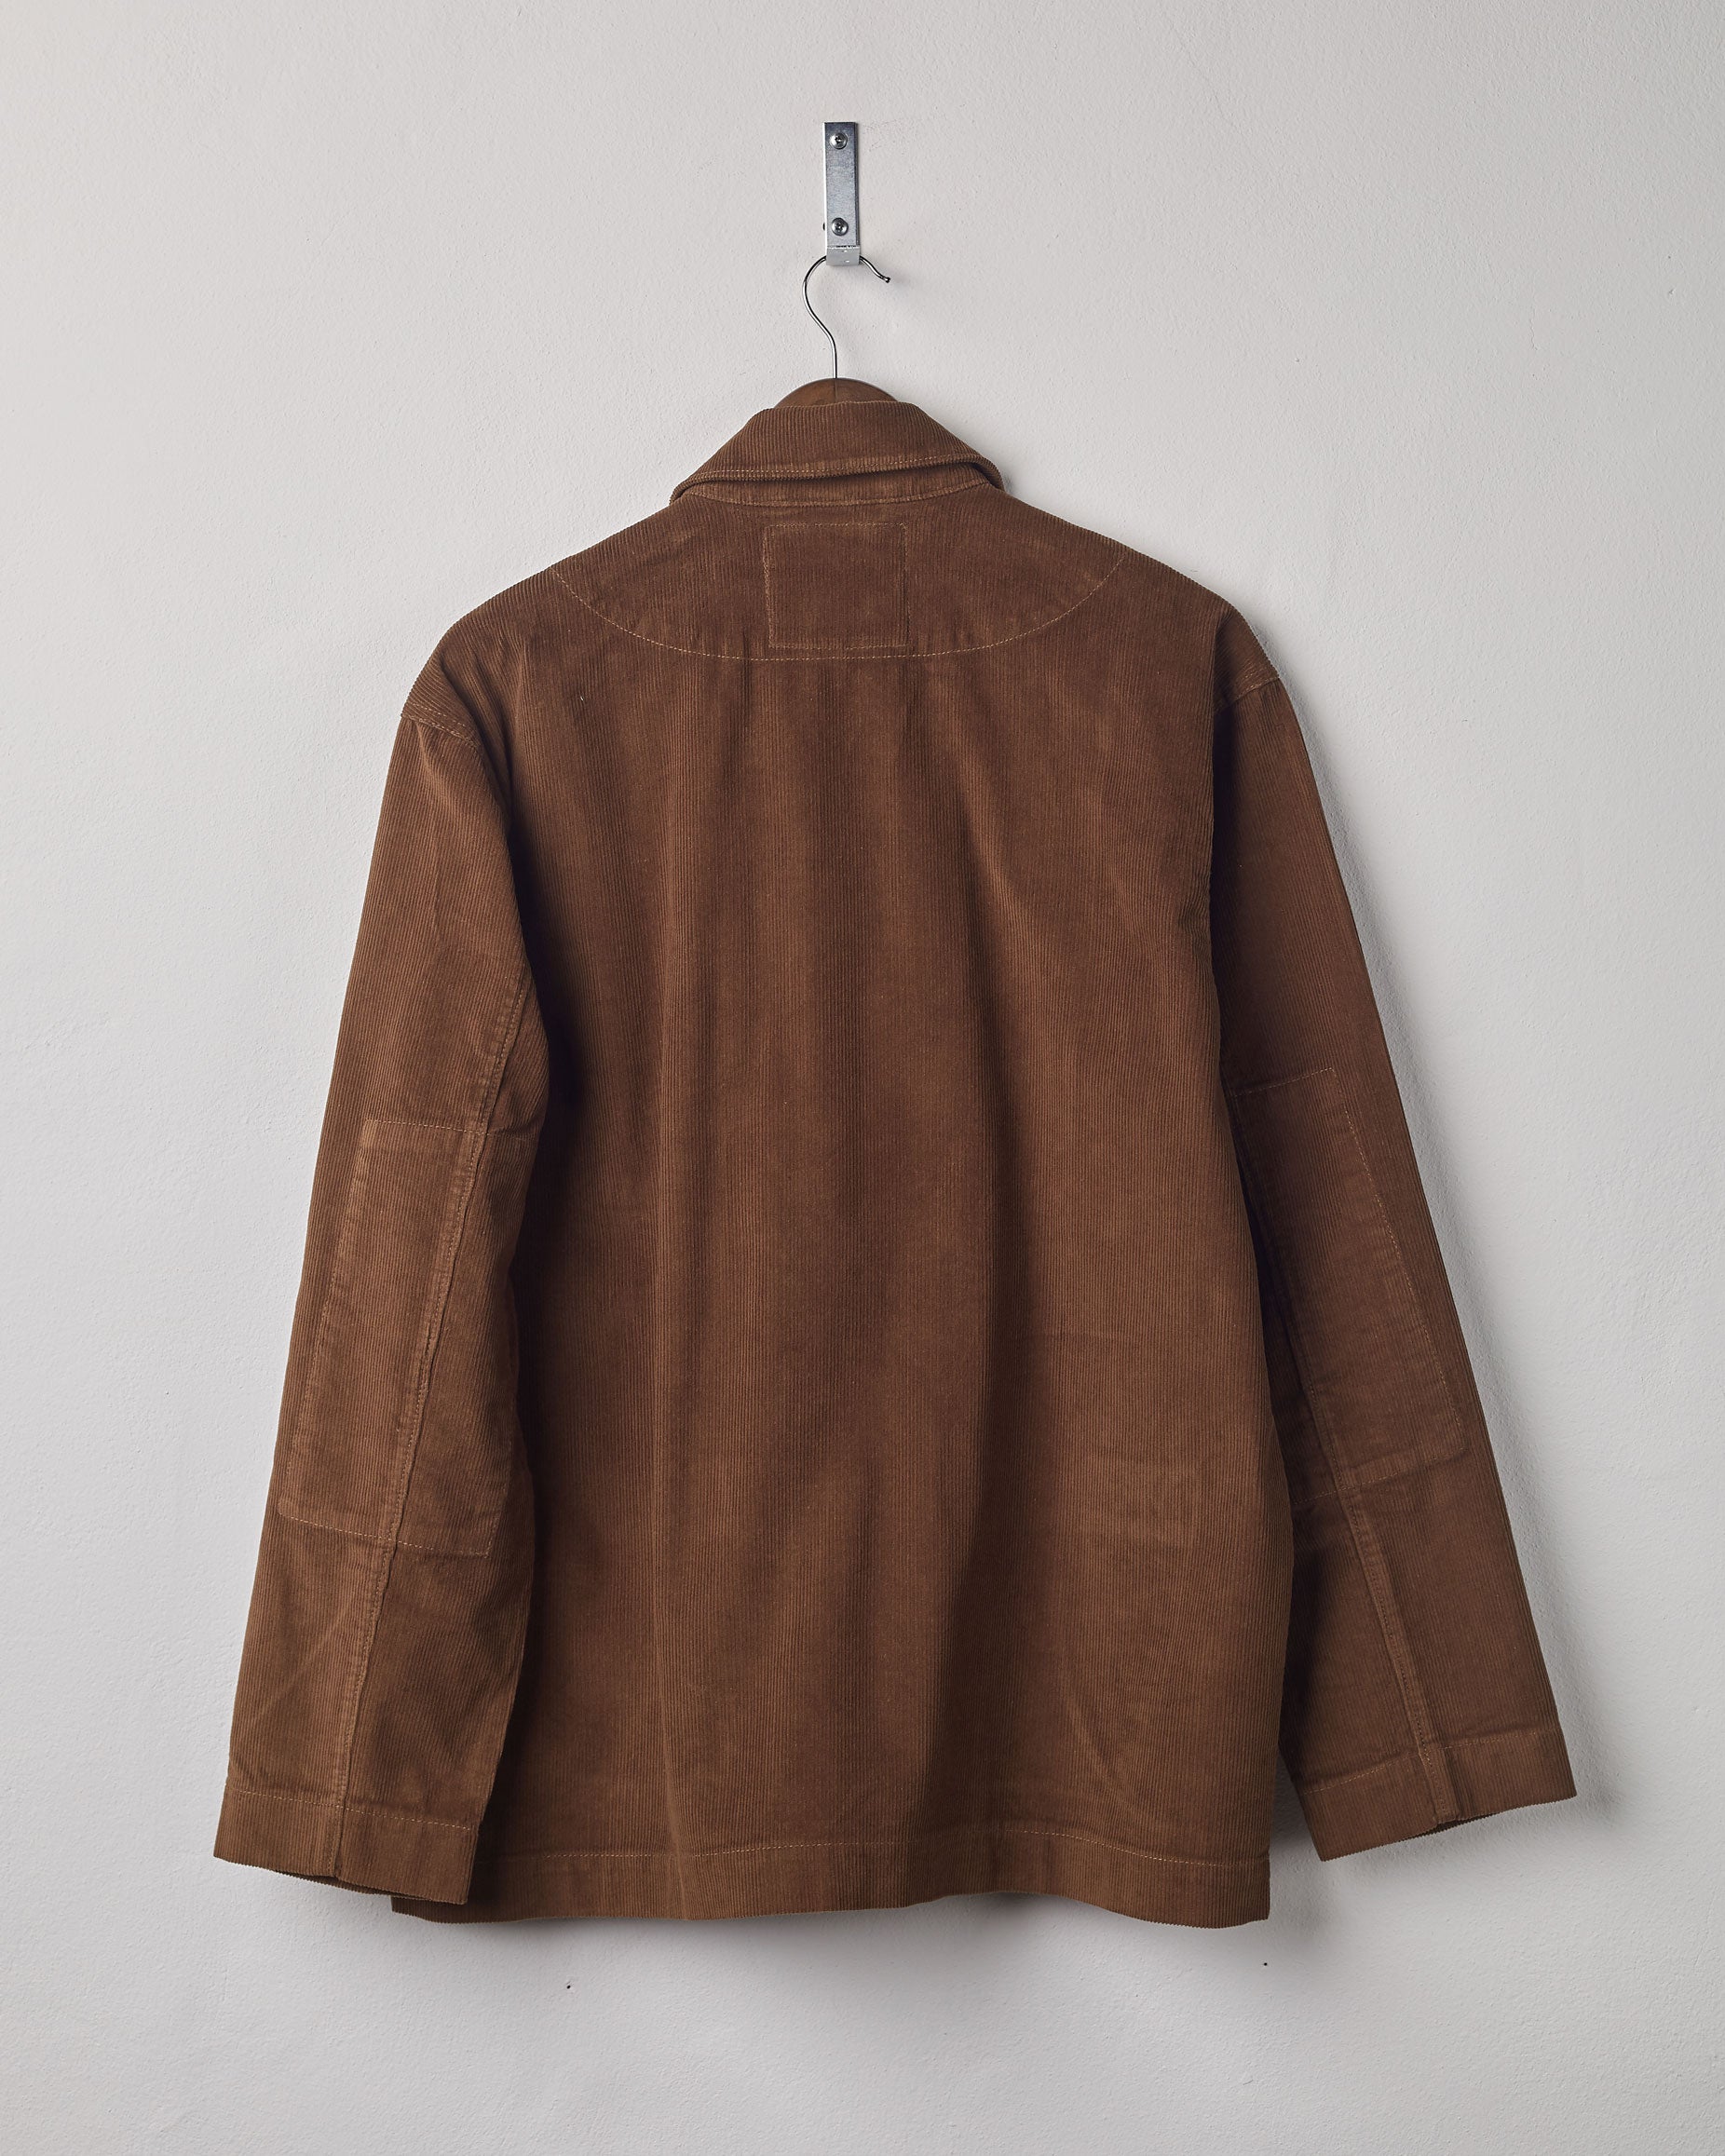 Full-length, rear view of Uskees #3006 blazer in brown corduroy showing reinforced elbows and simple design.